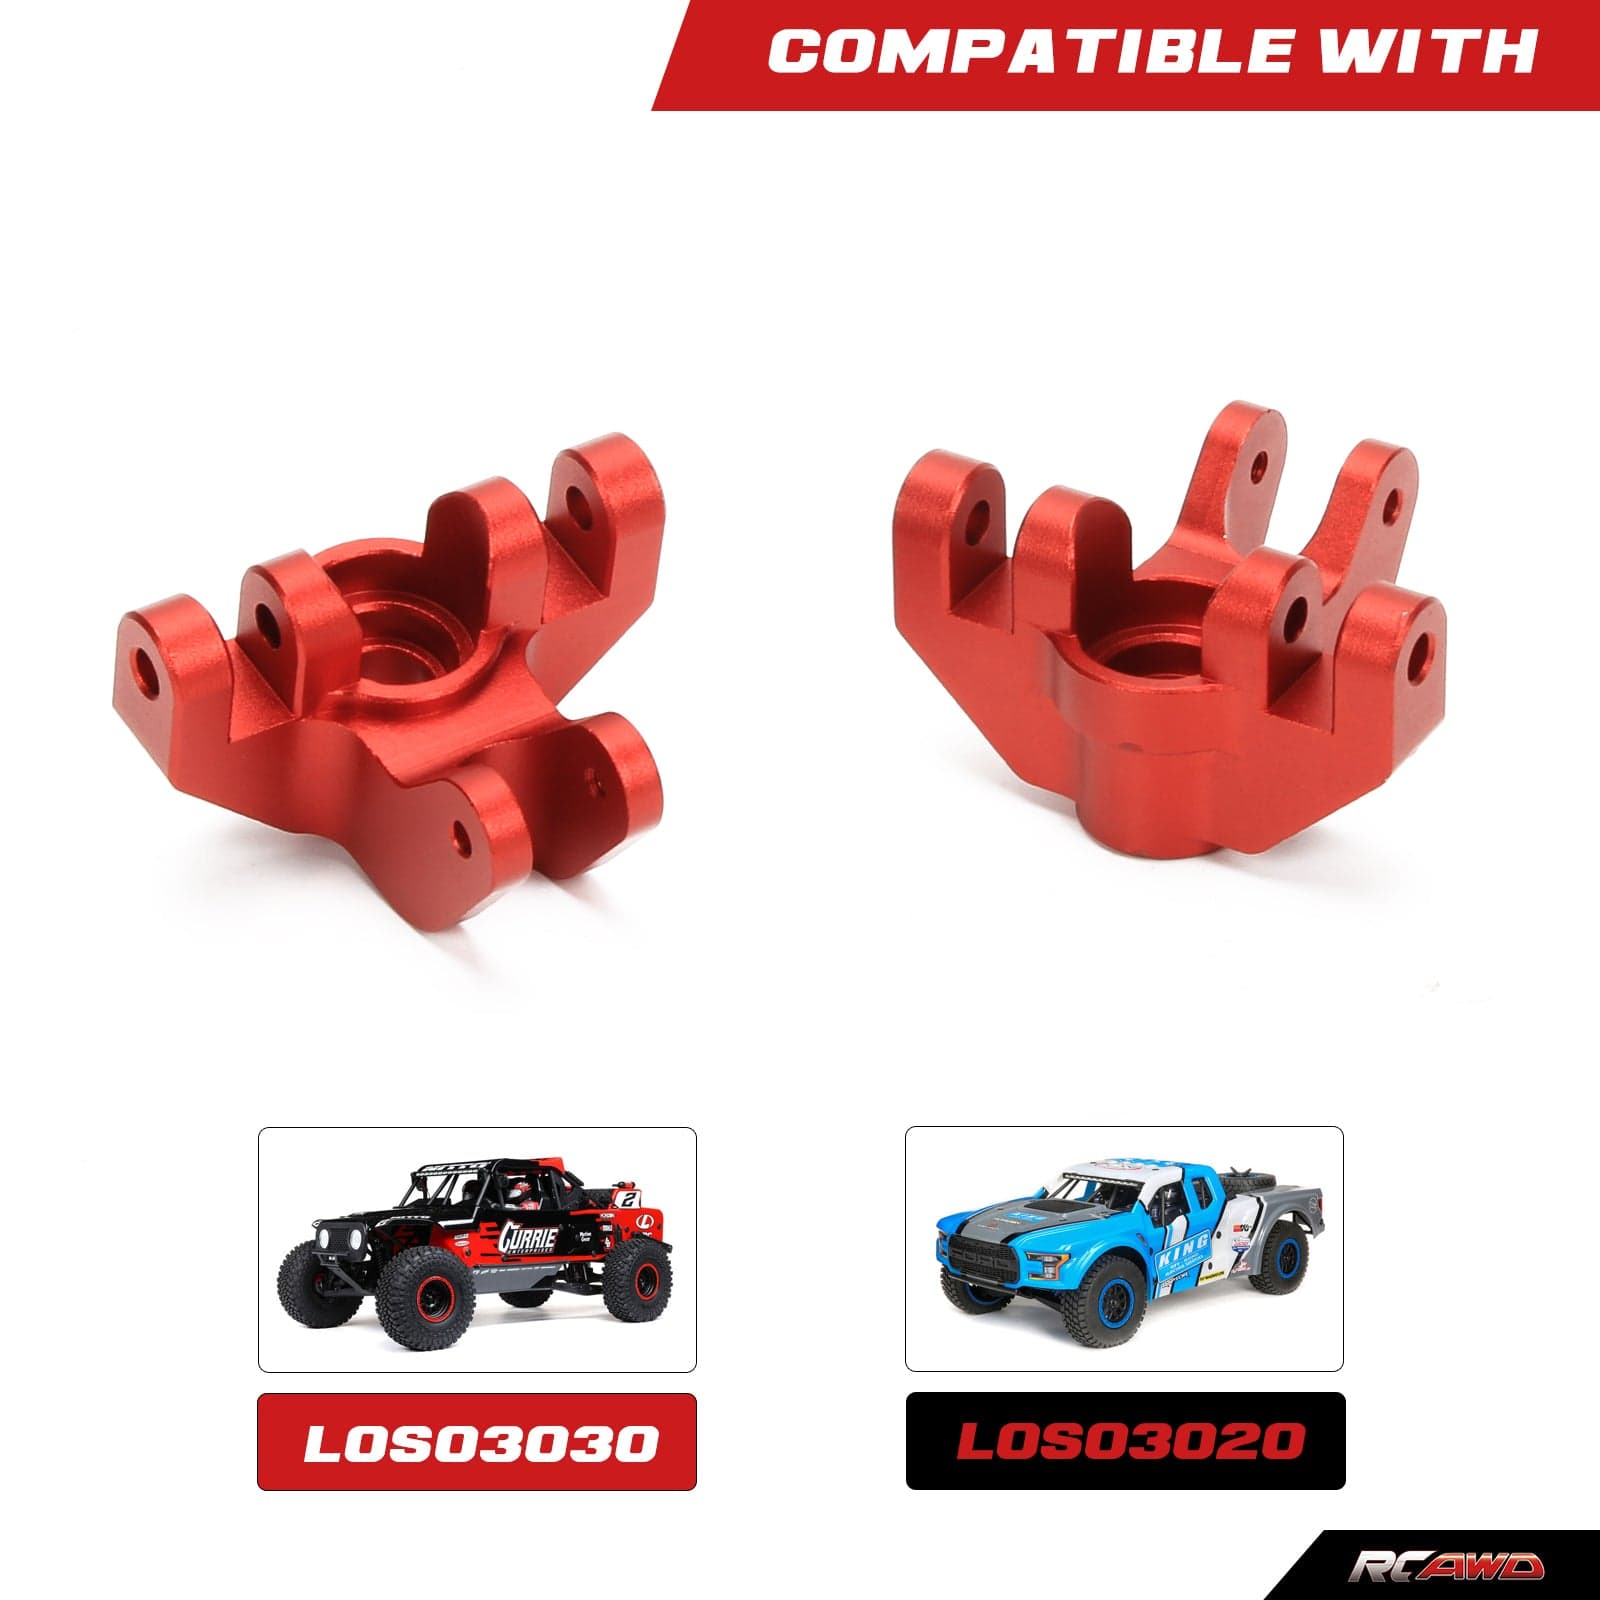 RCAWD LOSI 1/8 LMT machined Aluminum alloy steering hub carrier knuckle arm blocks Spindle Set Front (L/R) for 1-8 Losi LMT RC car Upgrded part